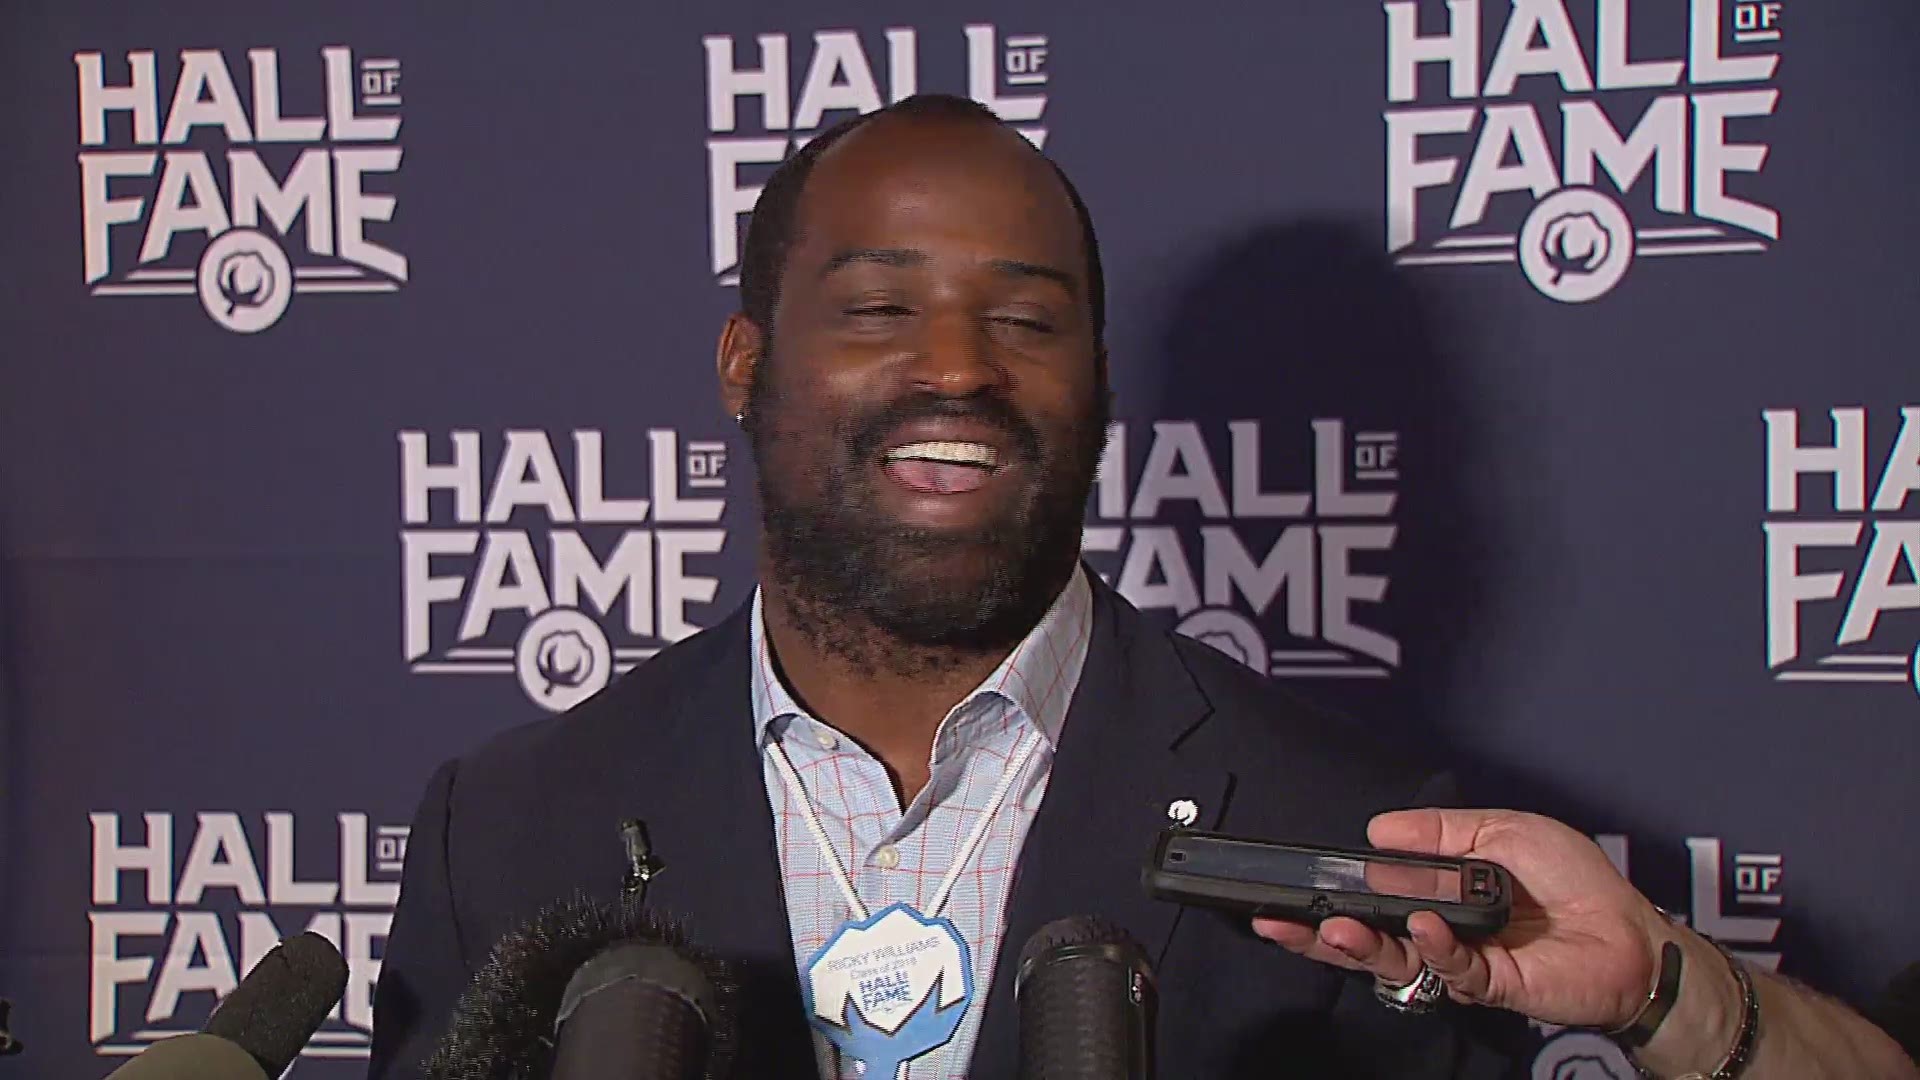 Ricky Williams was inducted into the Cotton Bowl Hall of Fame on Tuesday.